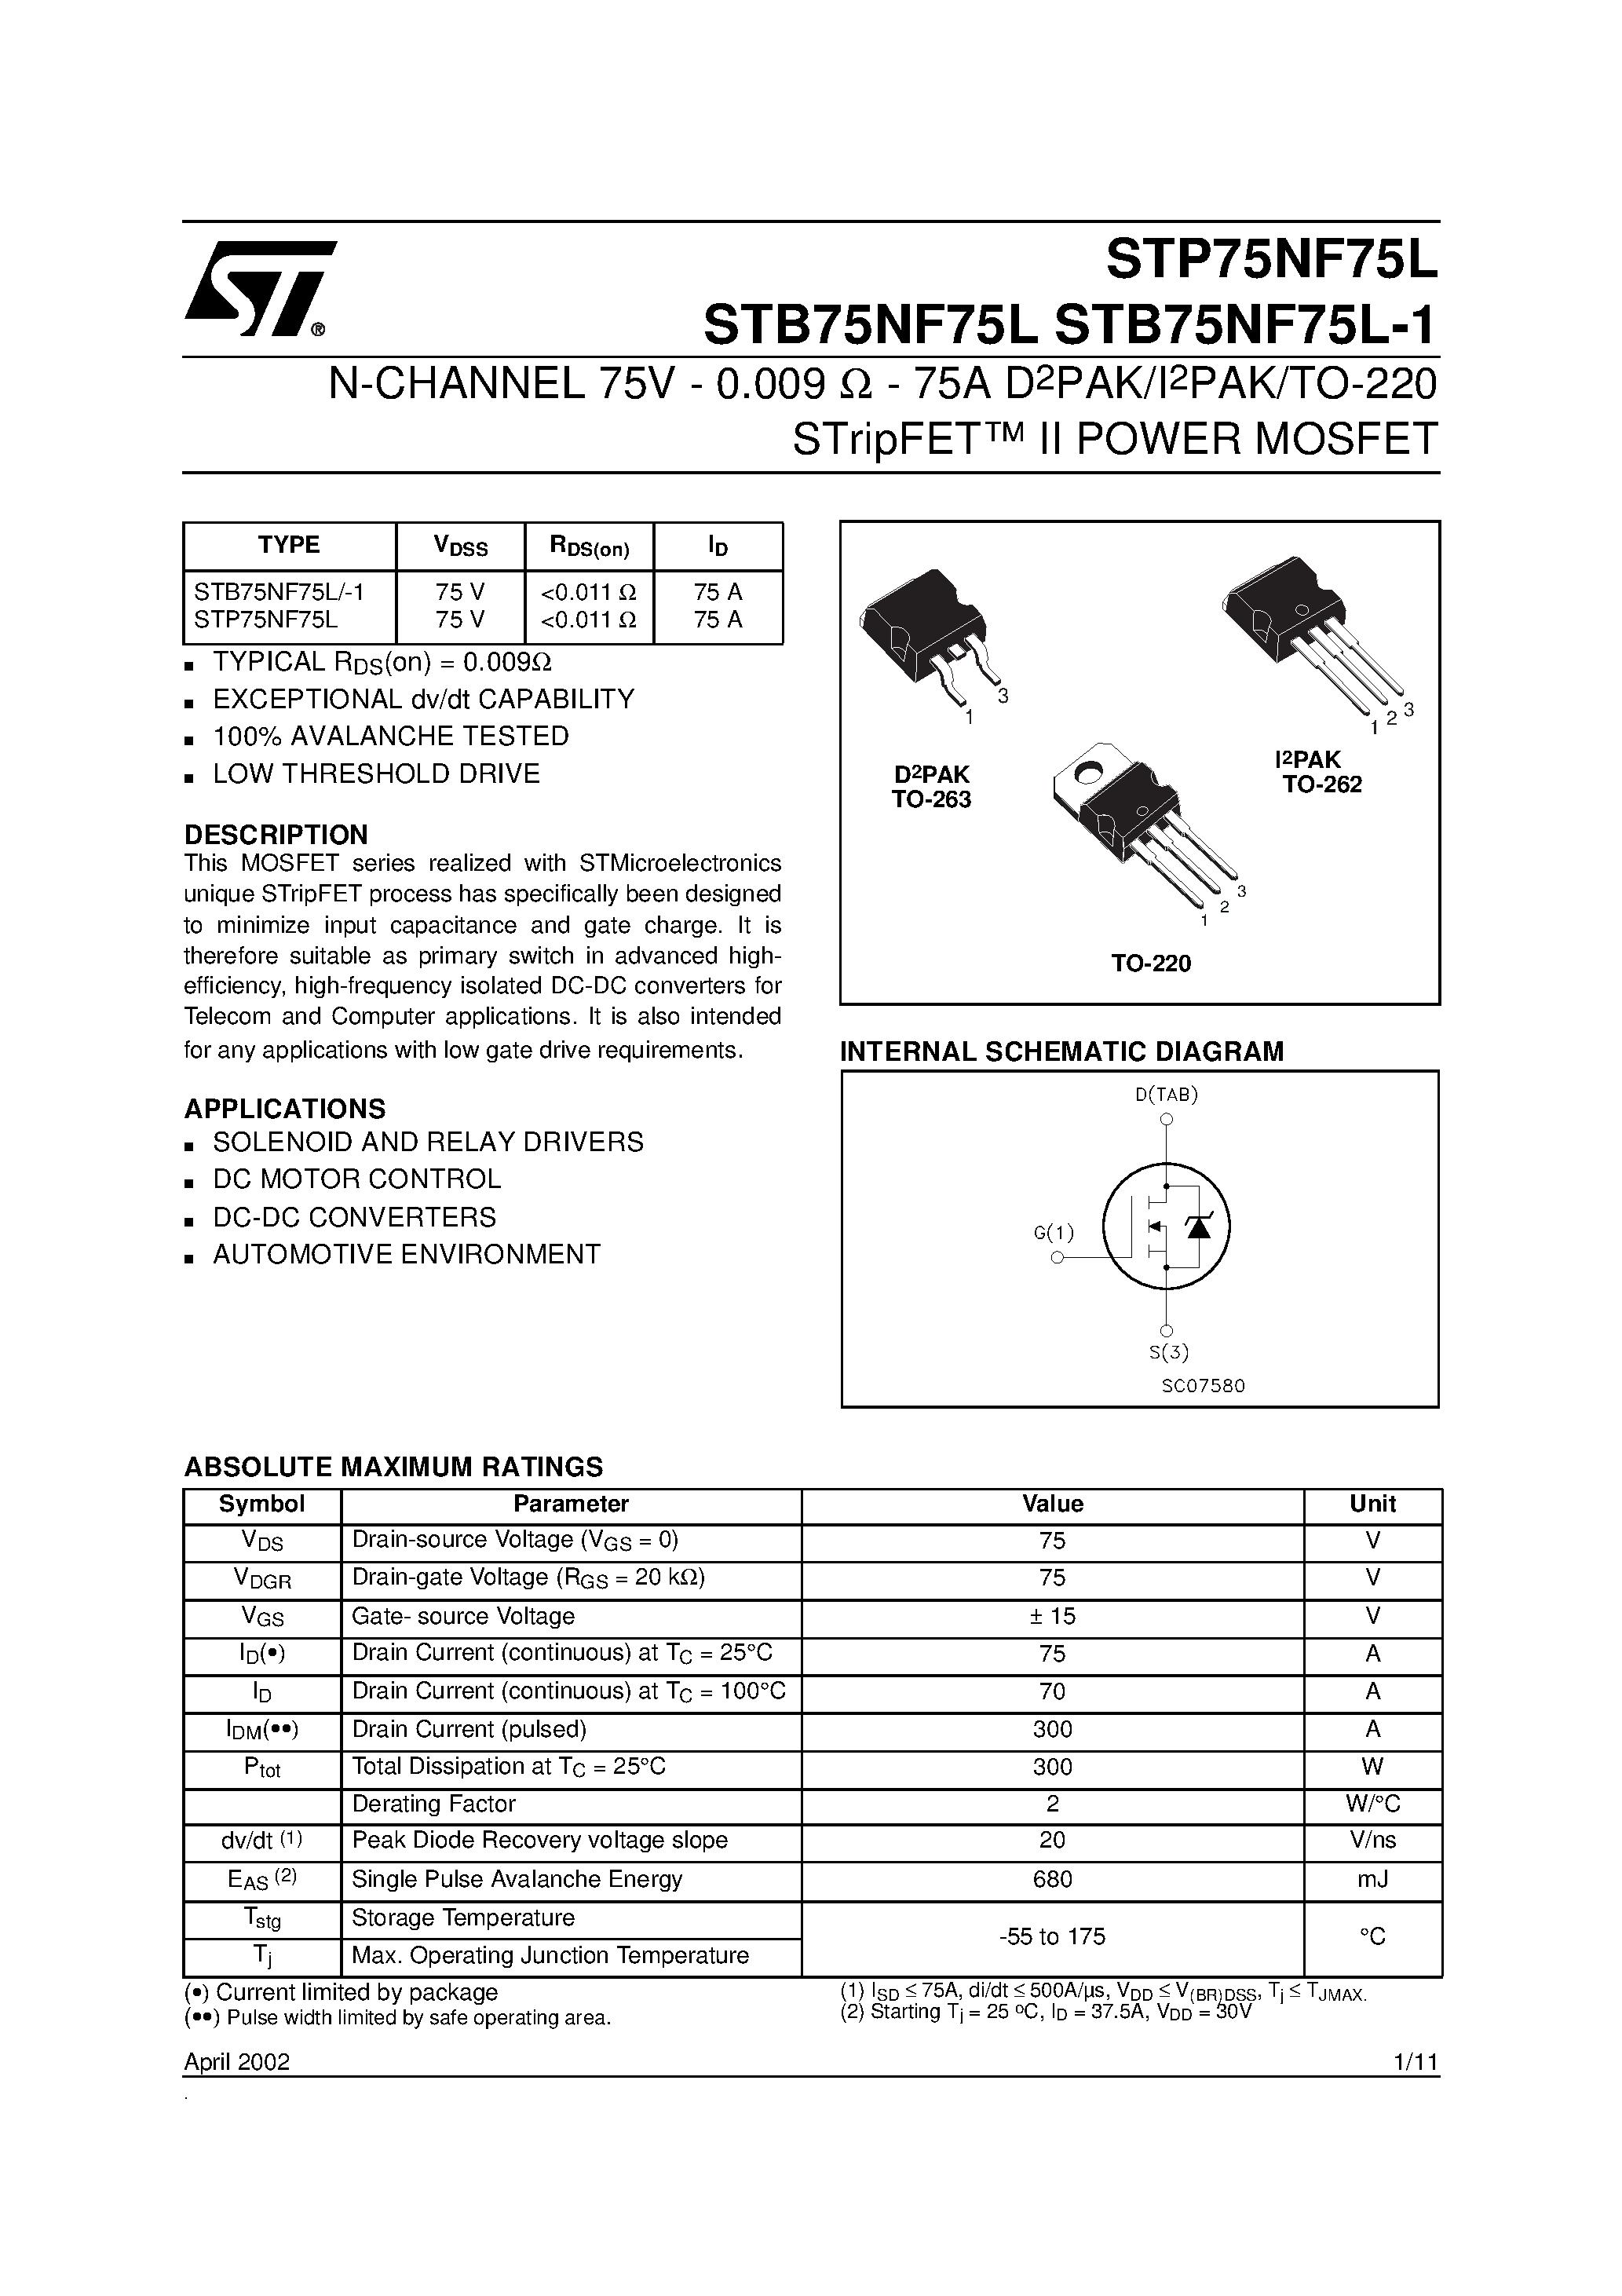 Datasheet STB75NF75L - N-CHANNEL MOSFET page 1